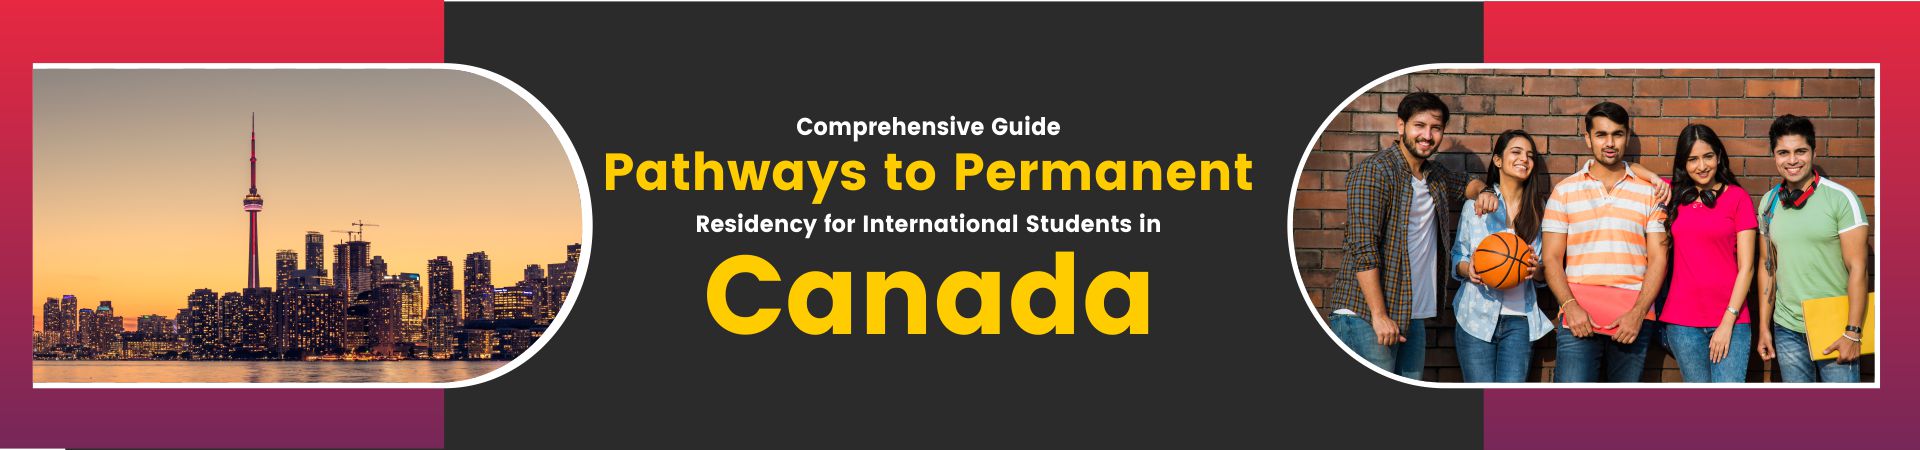 Comprehensive Guide: Pathways to Permanent Residency for International Students in Canada